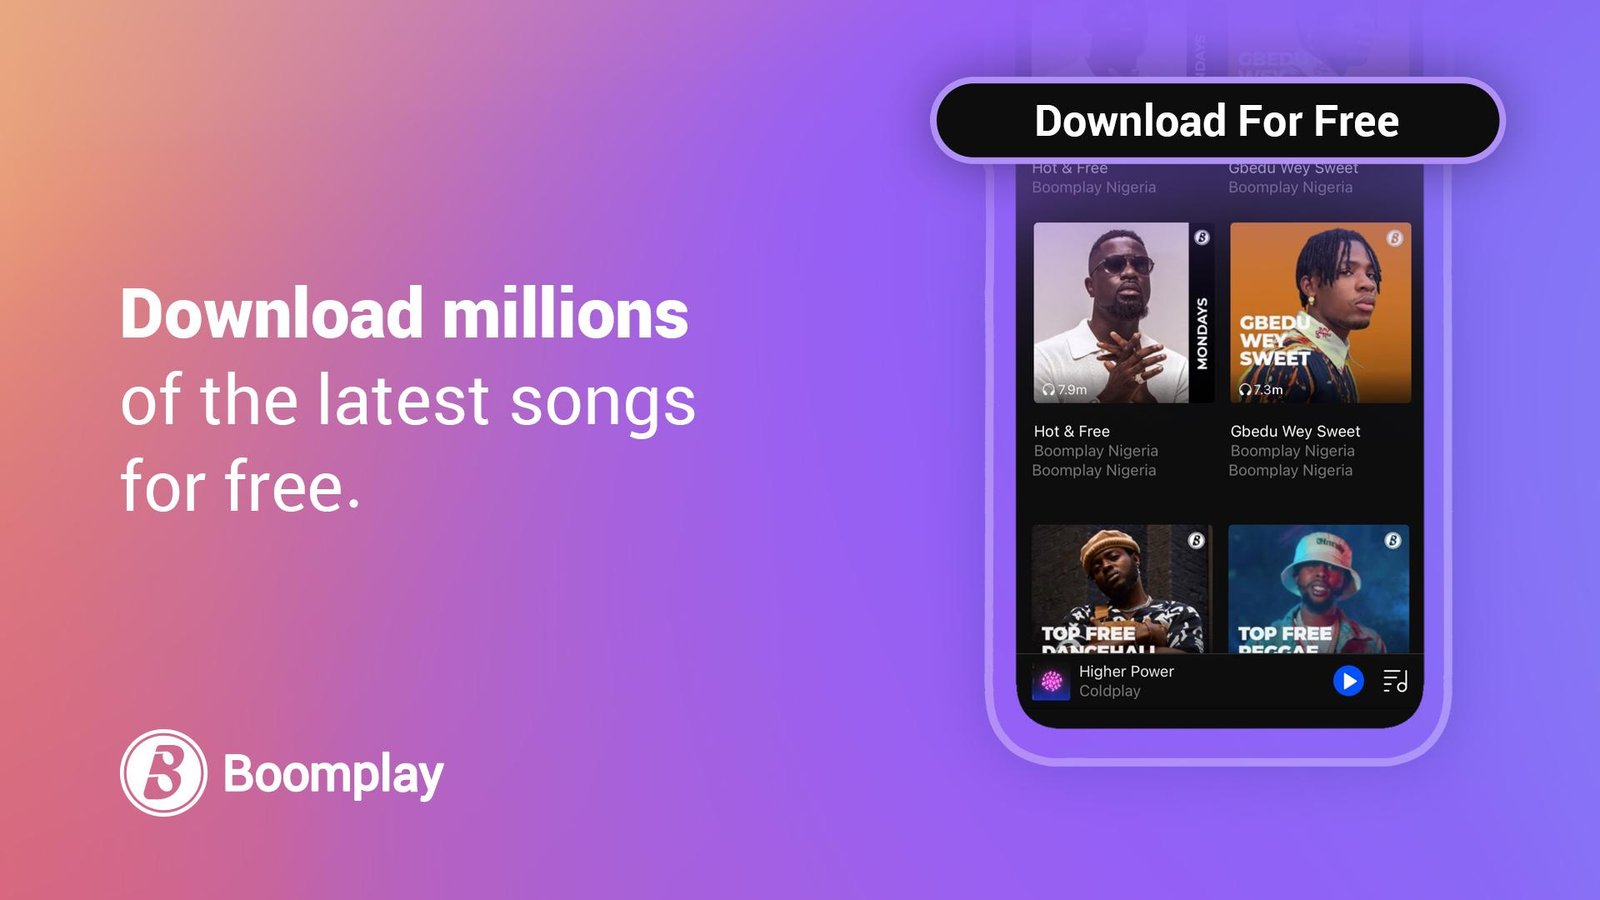 Here is a Musician's guide on What is Boomplay Music? With 70 million users, Boomplay is the most popular music streaming service in Africa.